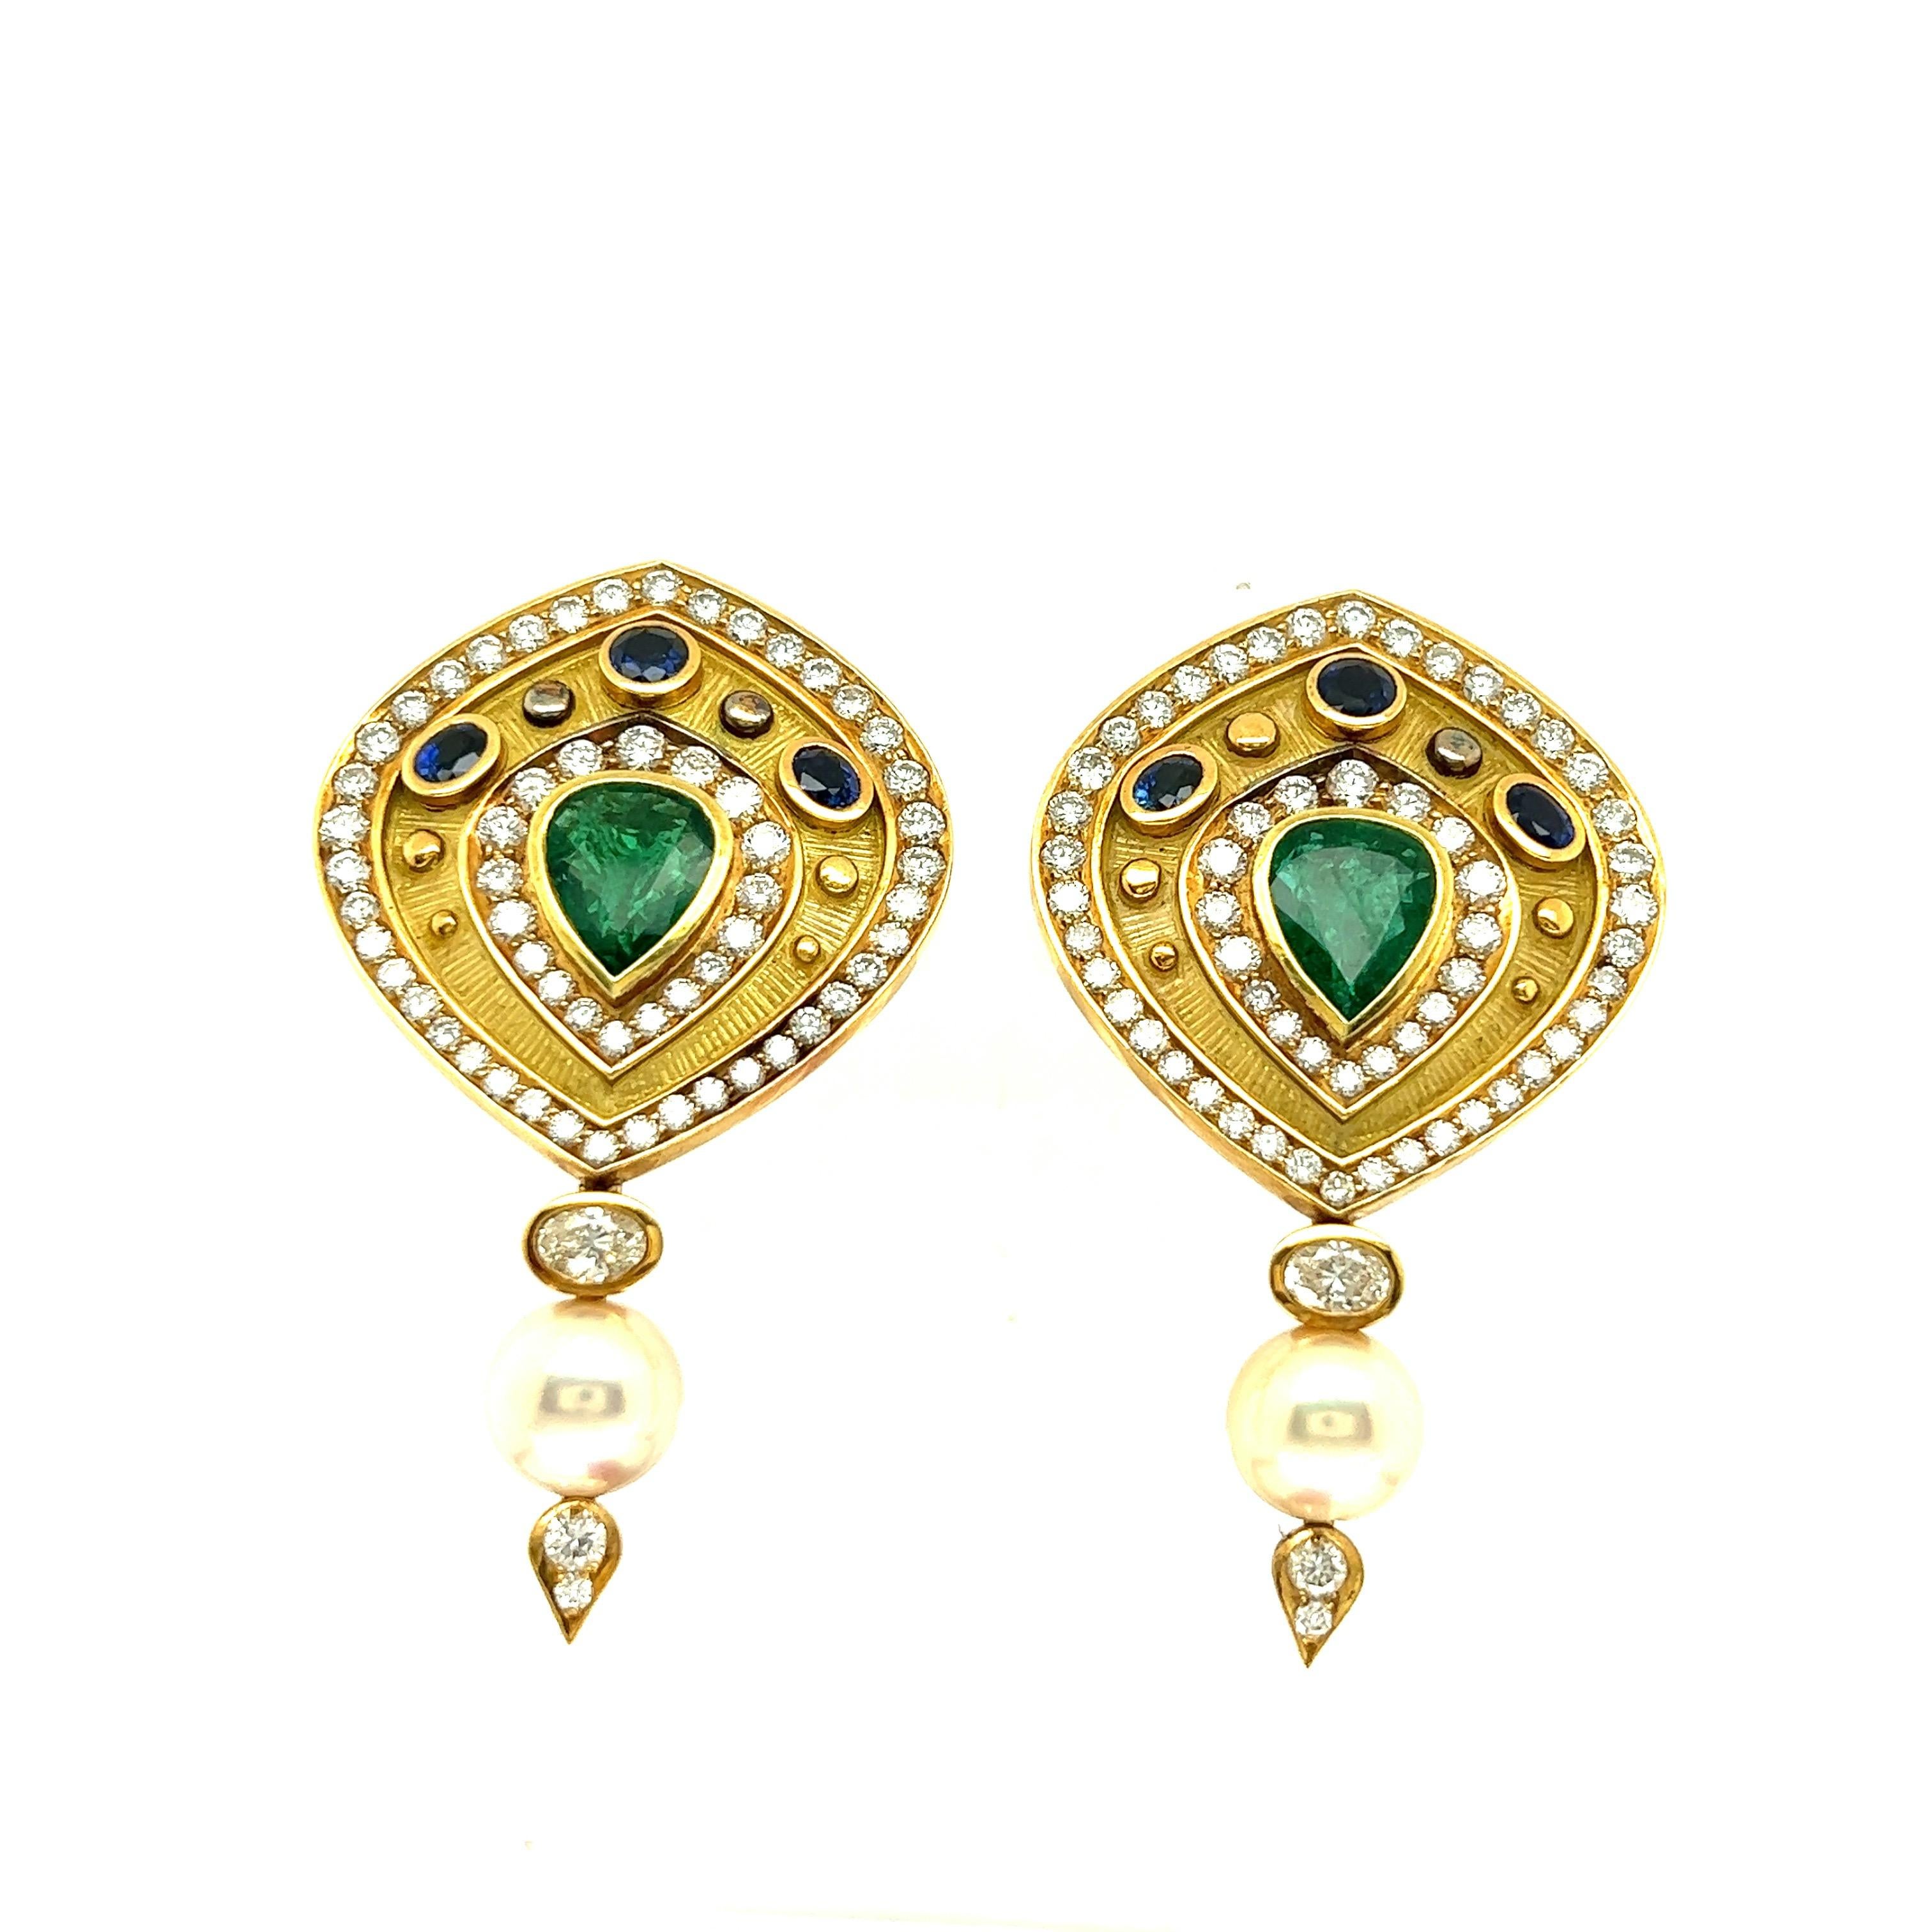 Pear Shaped Emerald, Diamond, and Sapphire 18k Yellow Gold Earrings In Excellent Condition For Sale In New York, NY